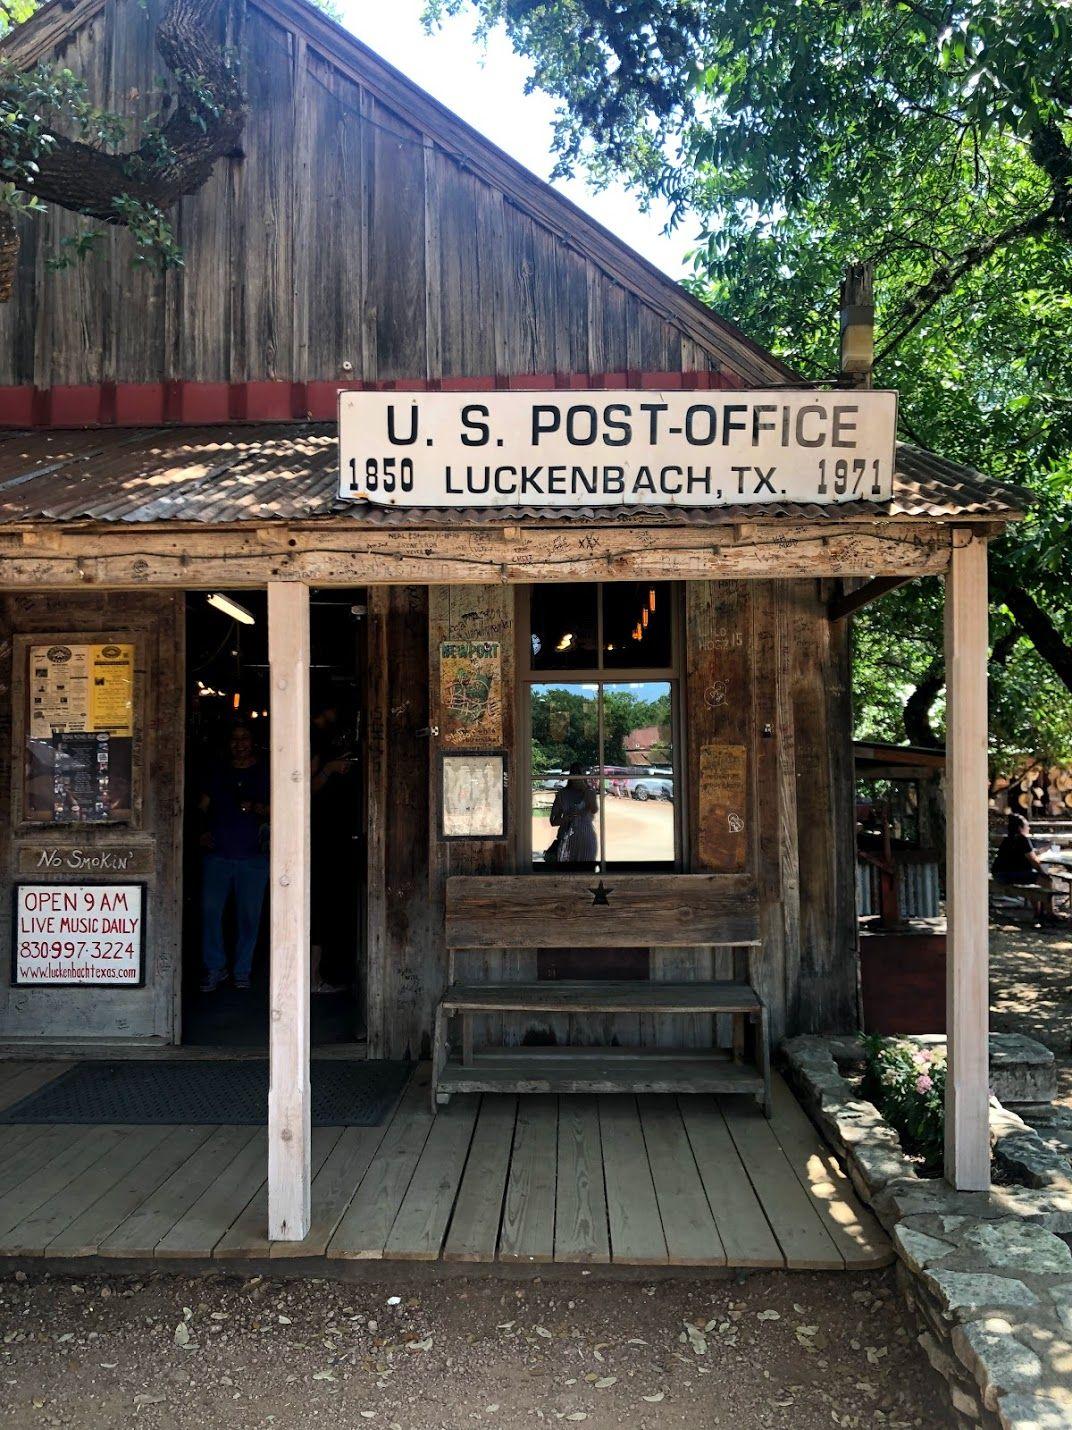 A small U.S. post office sign in Luckenbach, Texas.